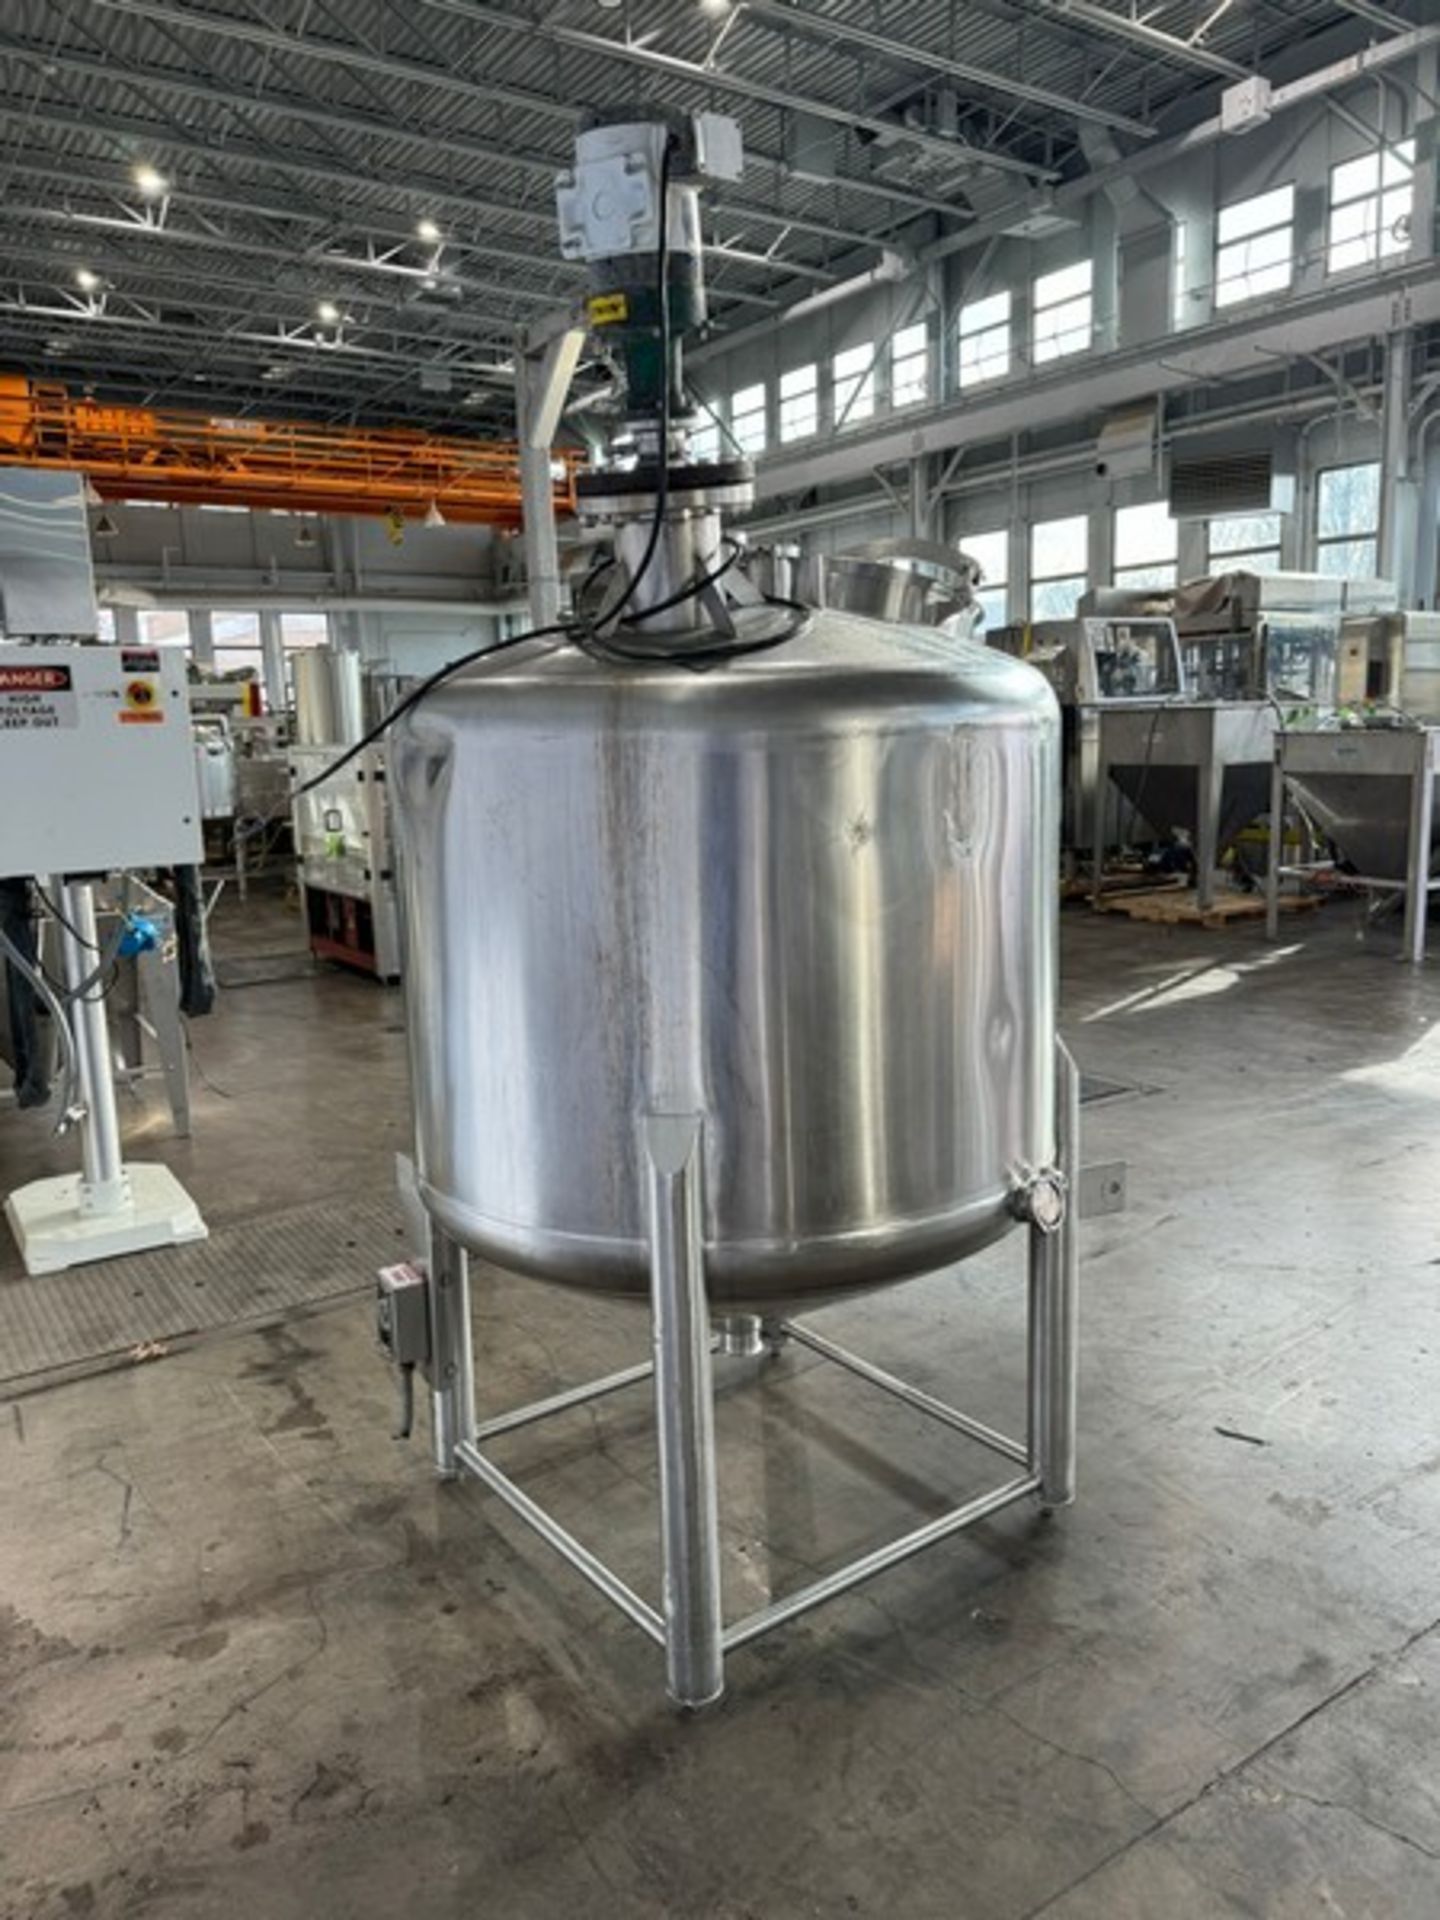 Aprox. 250 Gal. S/S Single Wall Mix Tank, Vessel Dims.: Aprox. 32" Tall x 48" Dia., with S/S - Image 5 of 11